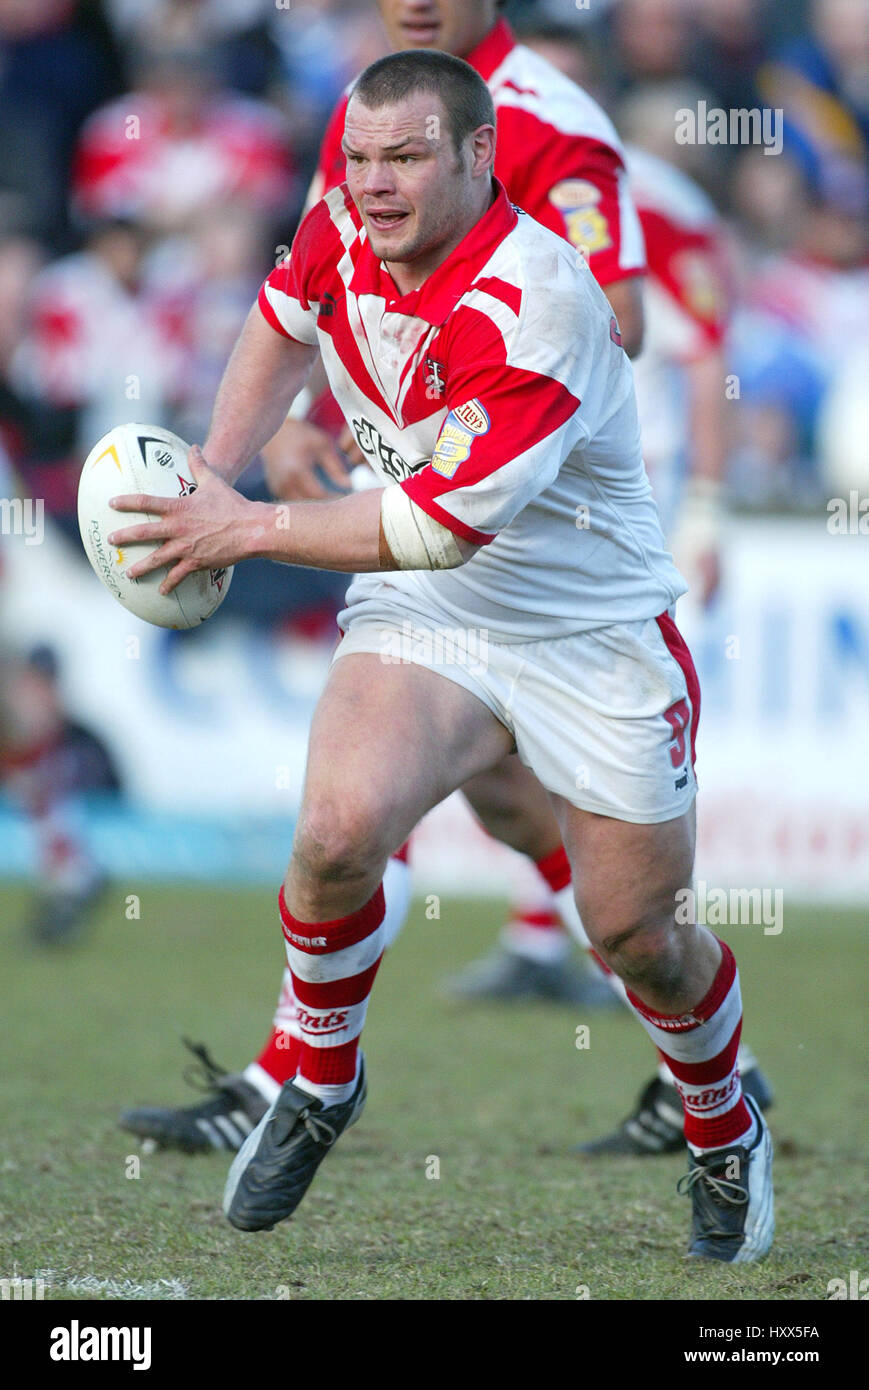 KEIRON CUNNINGHAM ST.HELENS RLFC KNOWSLEY ROAD ST.HELENS 13 March 2004 Stock Photo